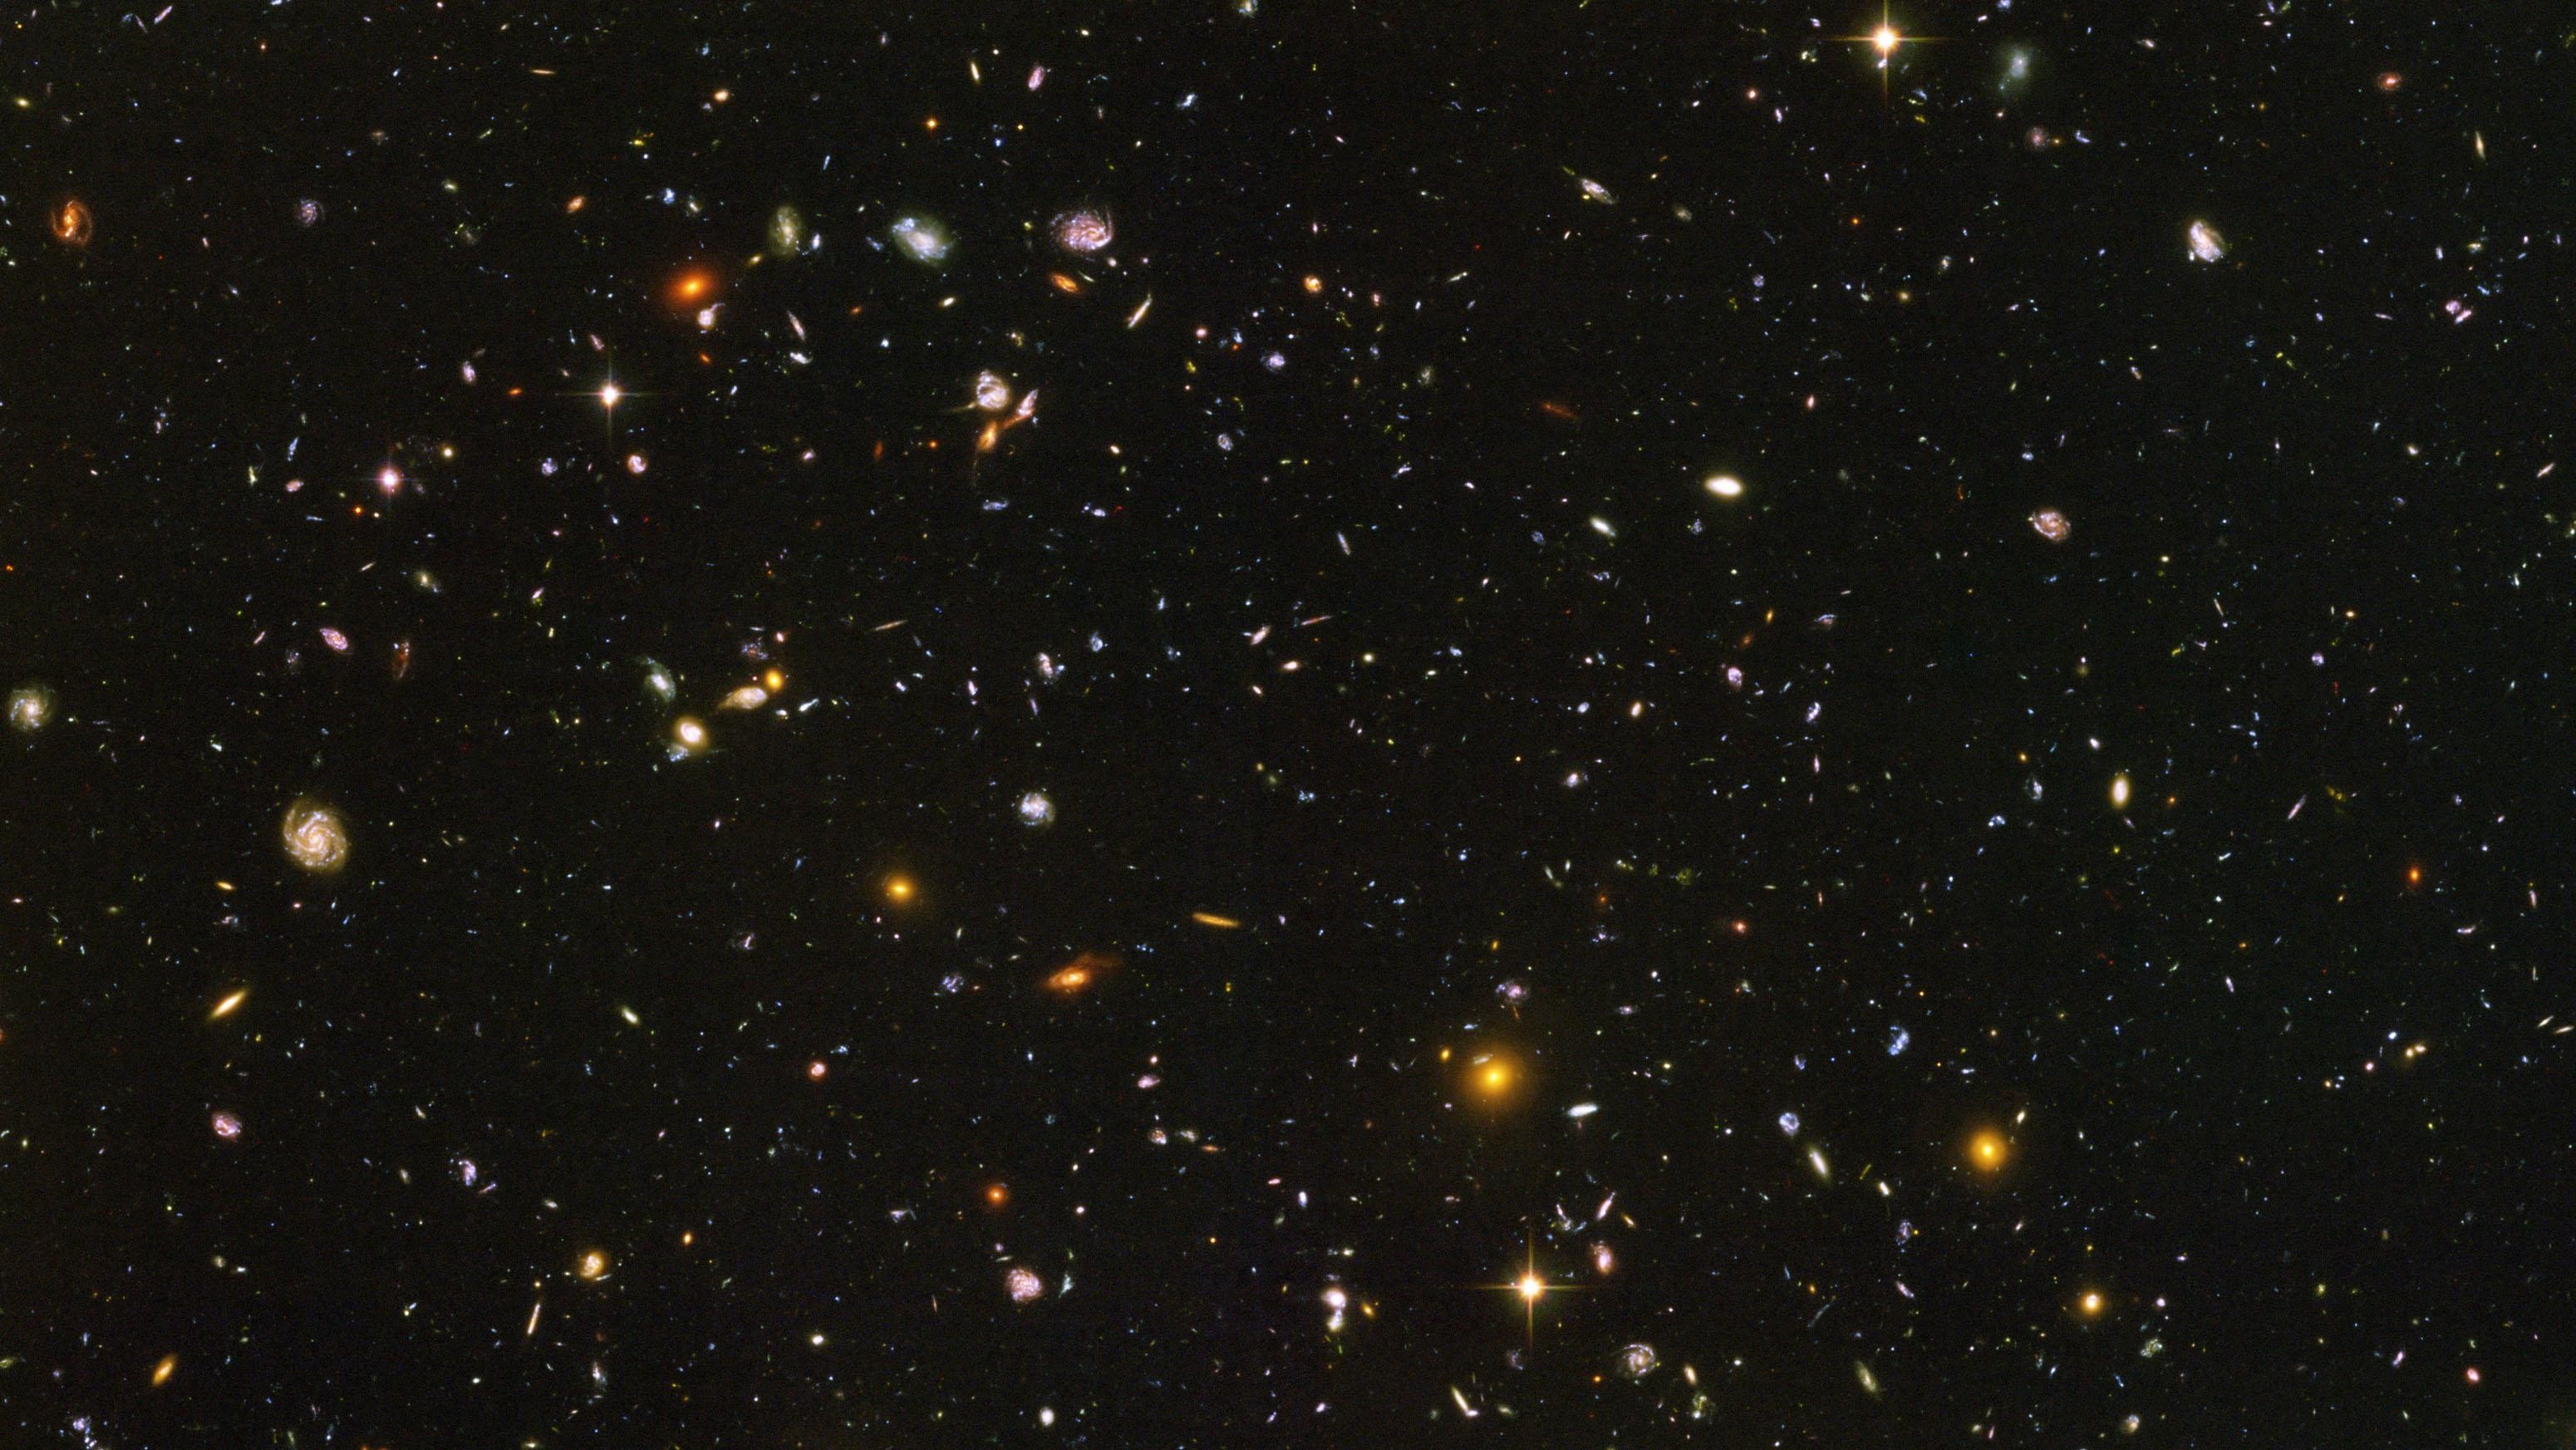 3100x1745 I prefer starry backgrounds. I've had the hubble deepfield as my background  for years. ...